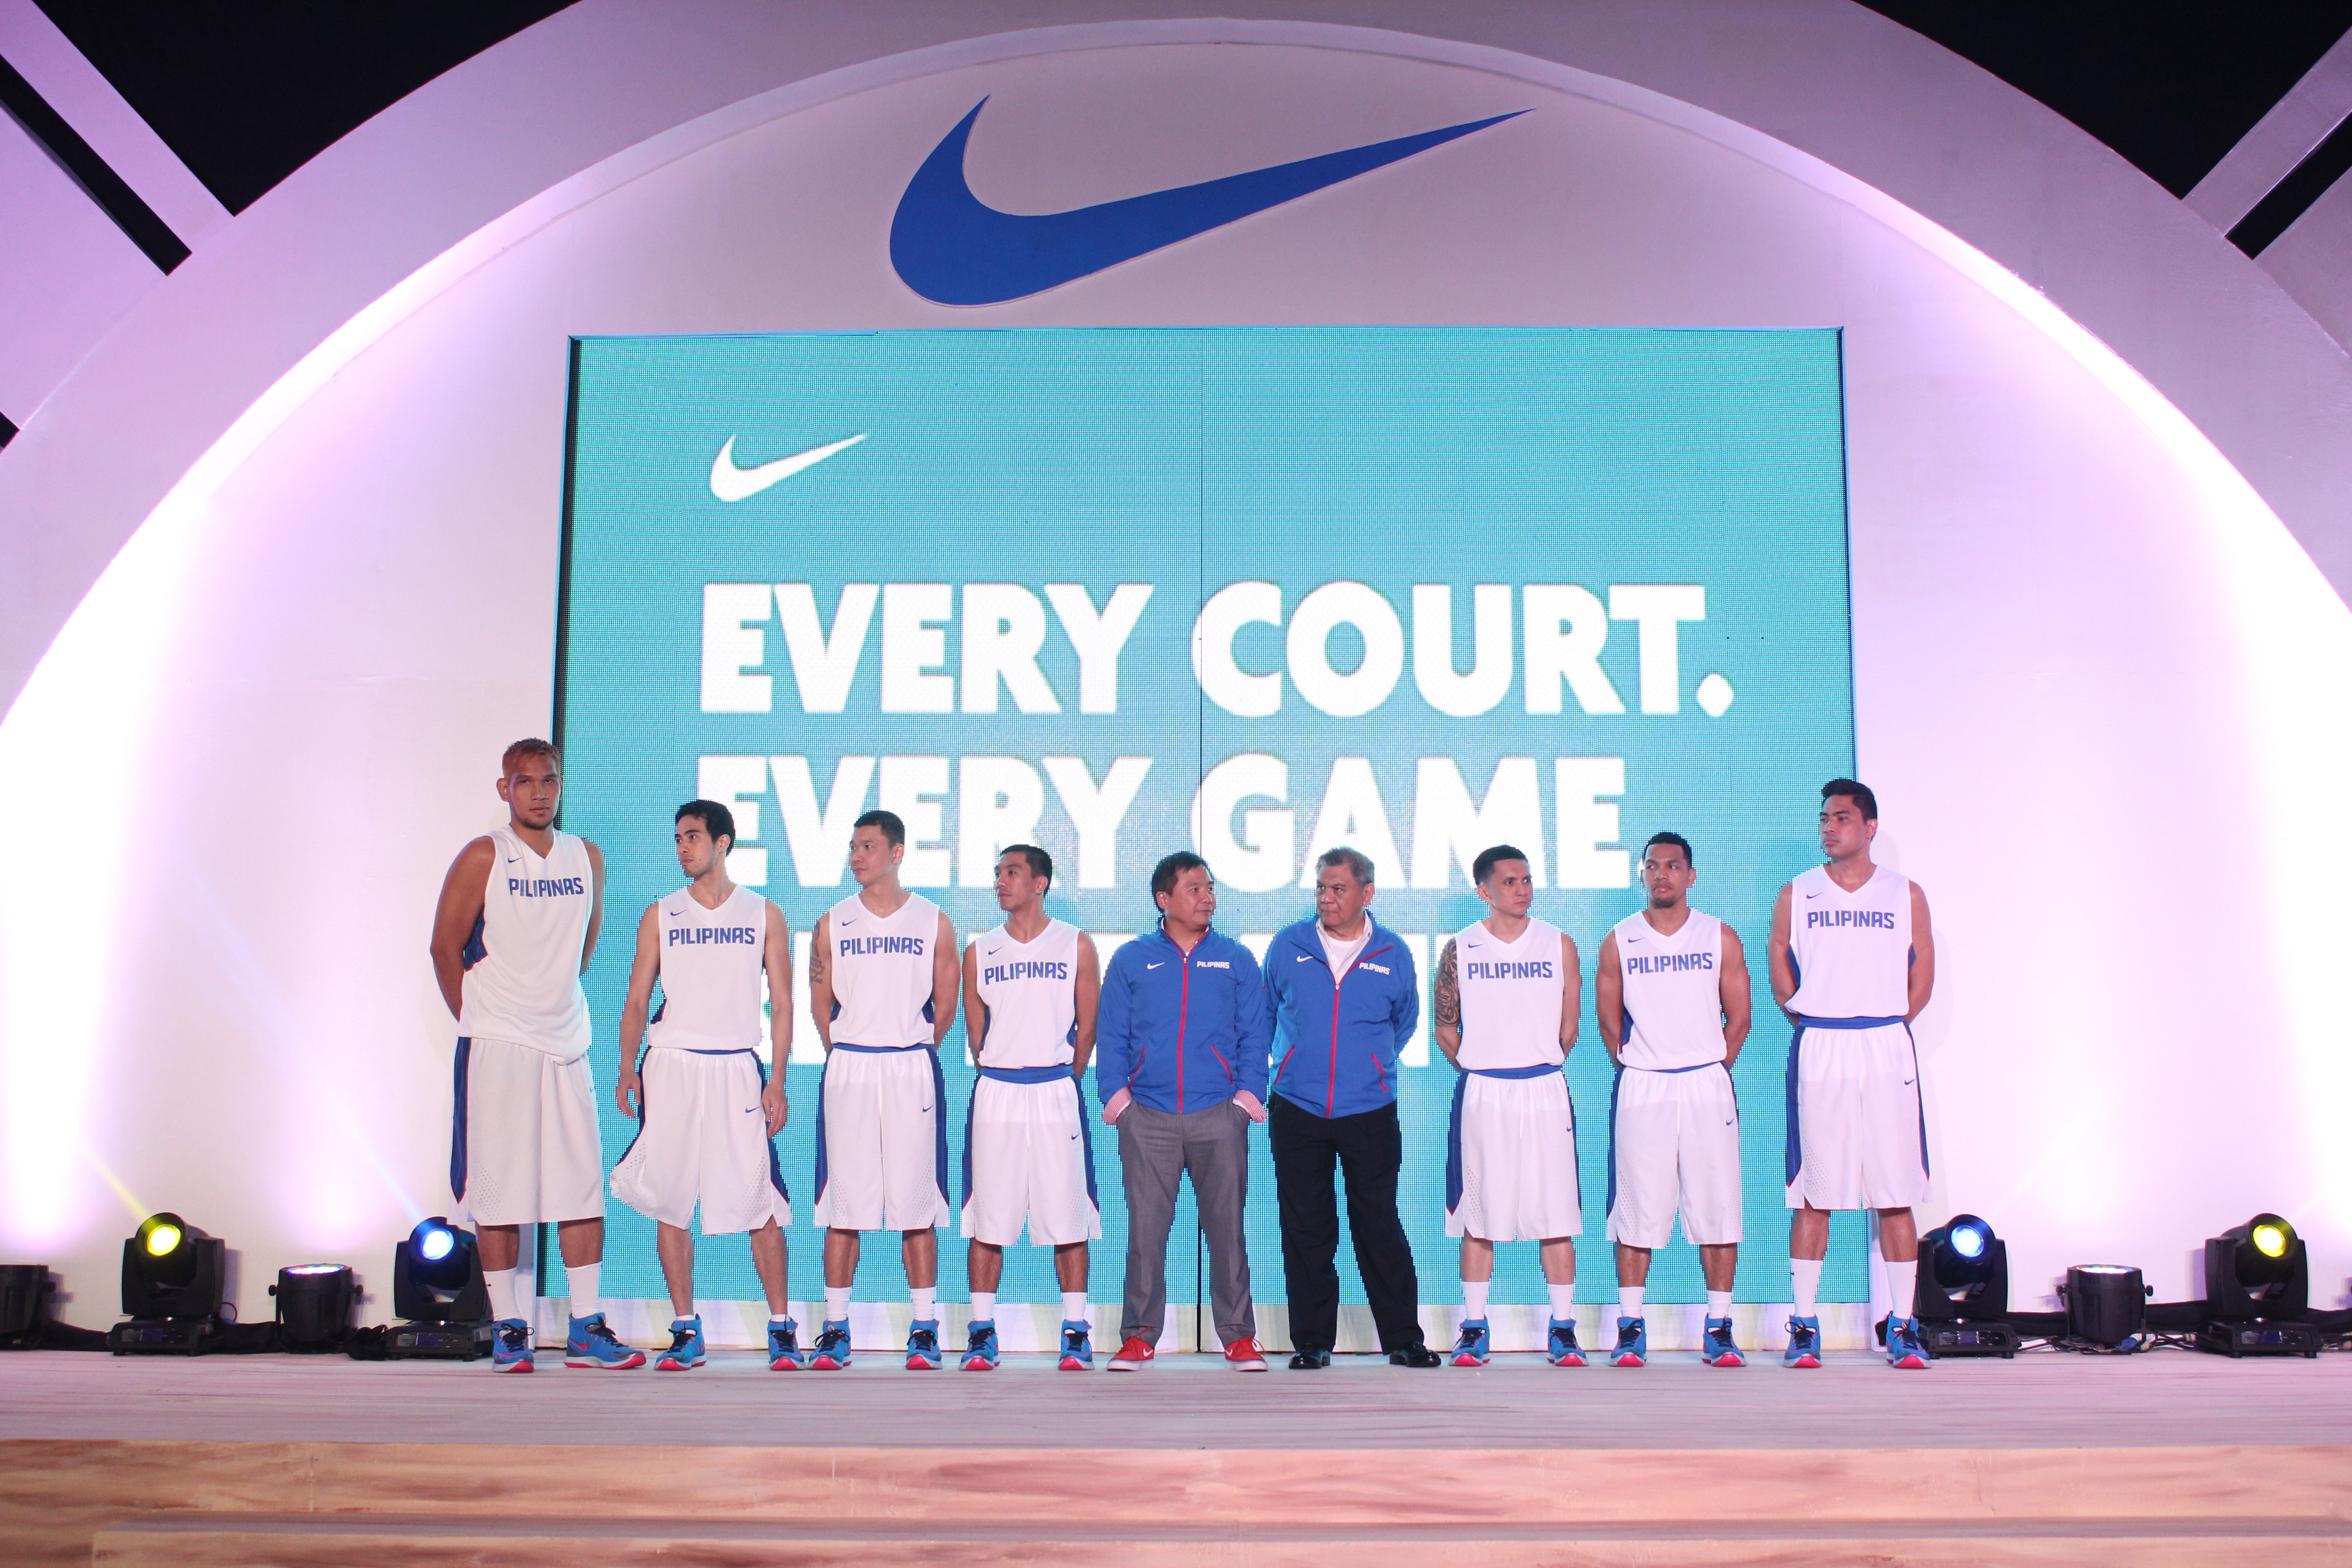 Nike MIN - GILAS PILIPINAS! Available on August 24, 2019